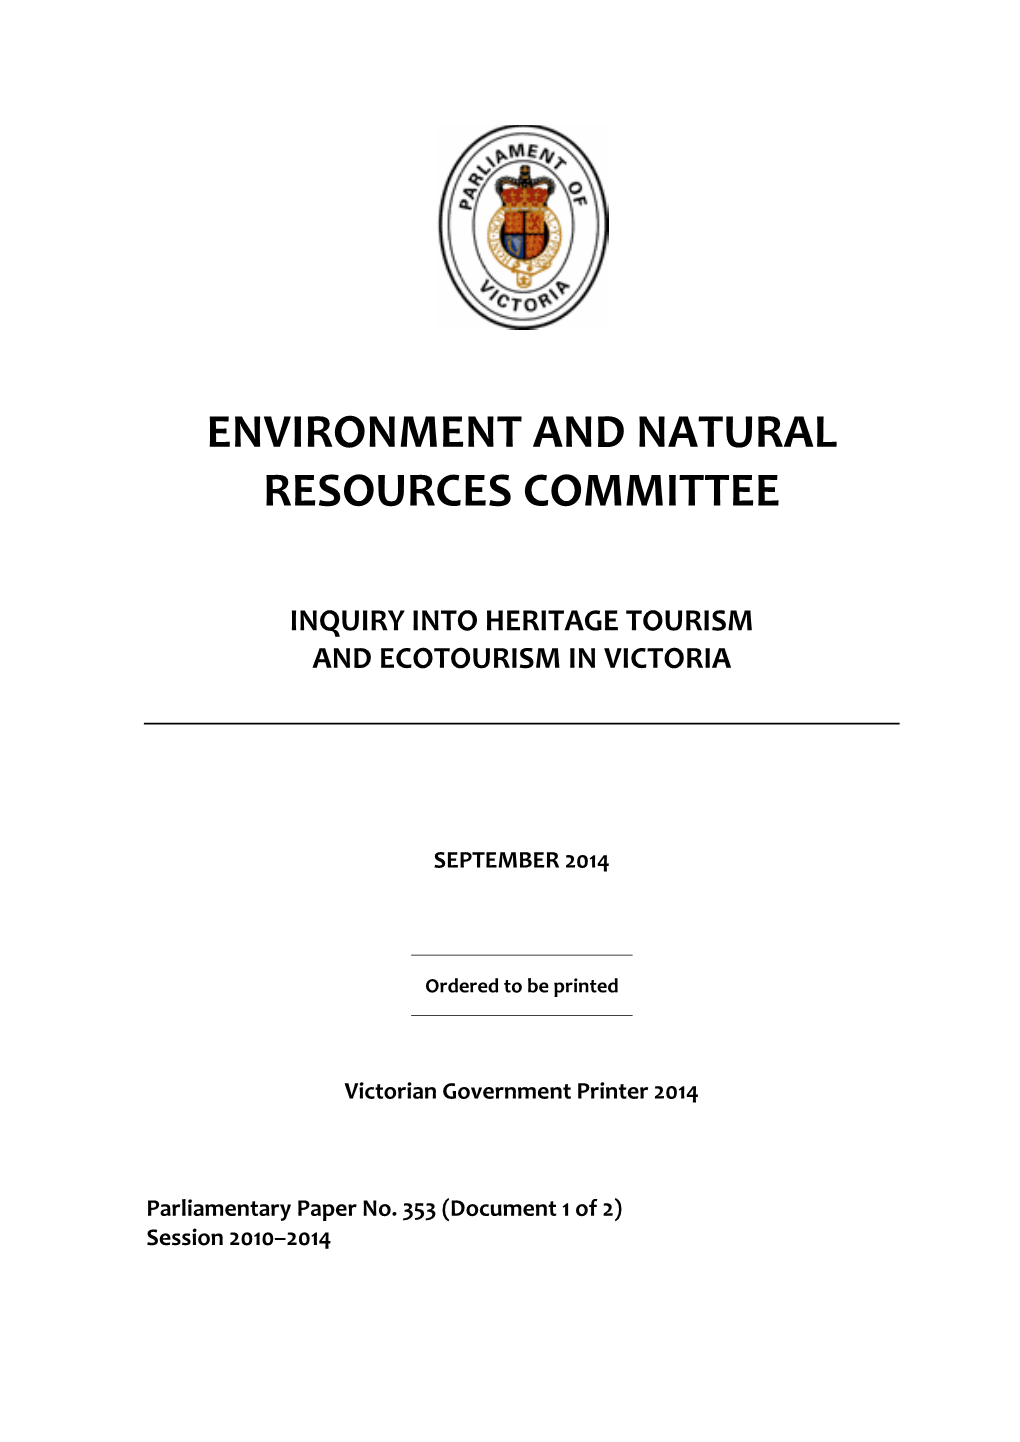 Environment and Natural Resources Committee